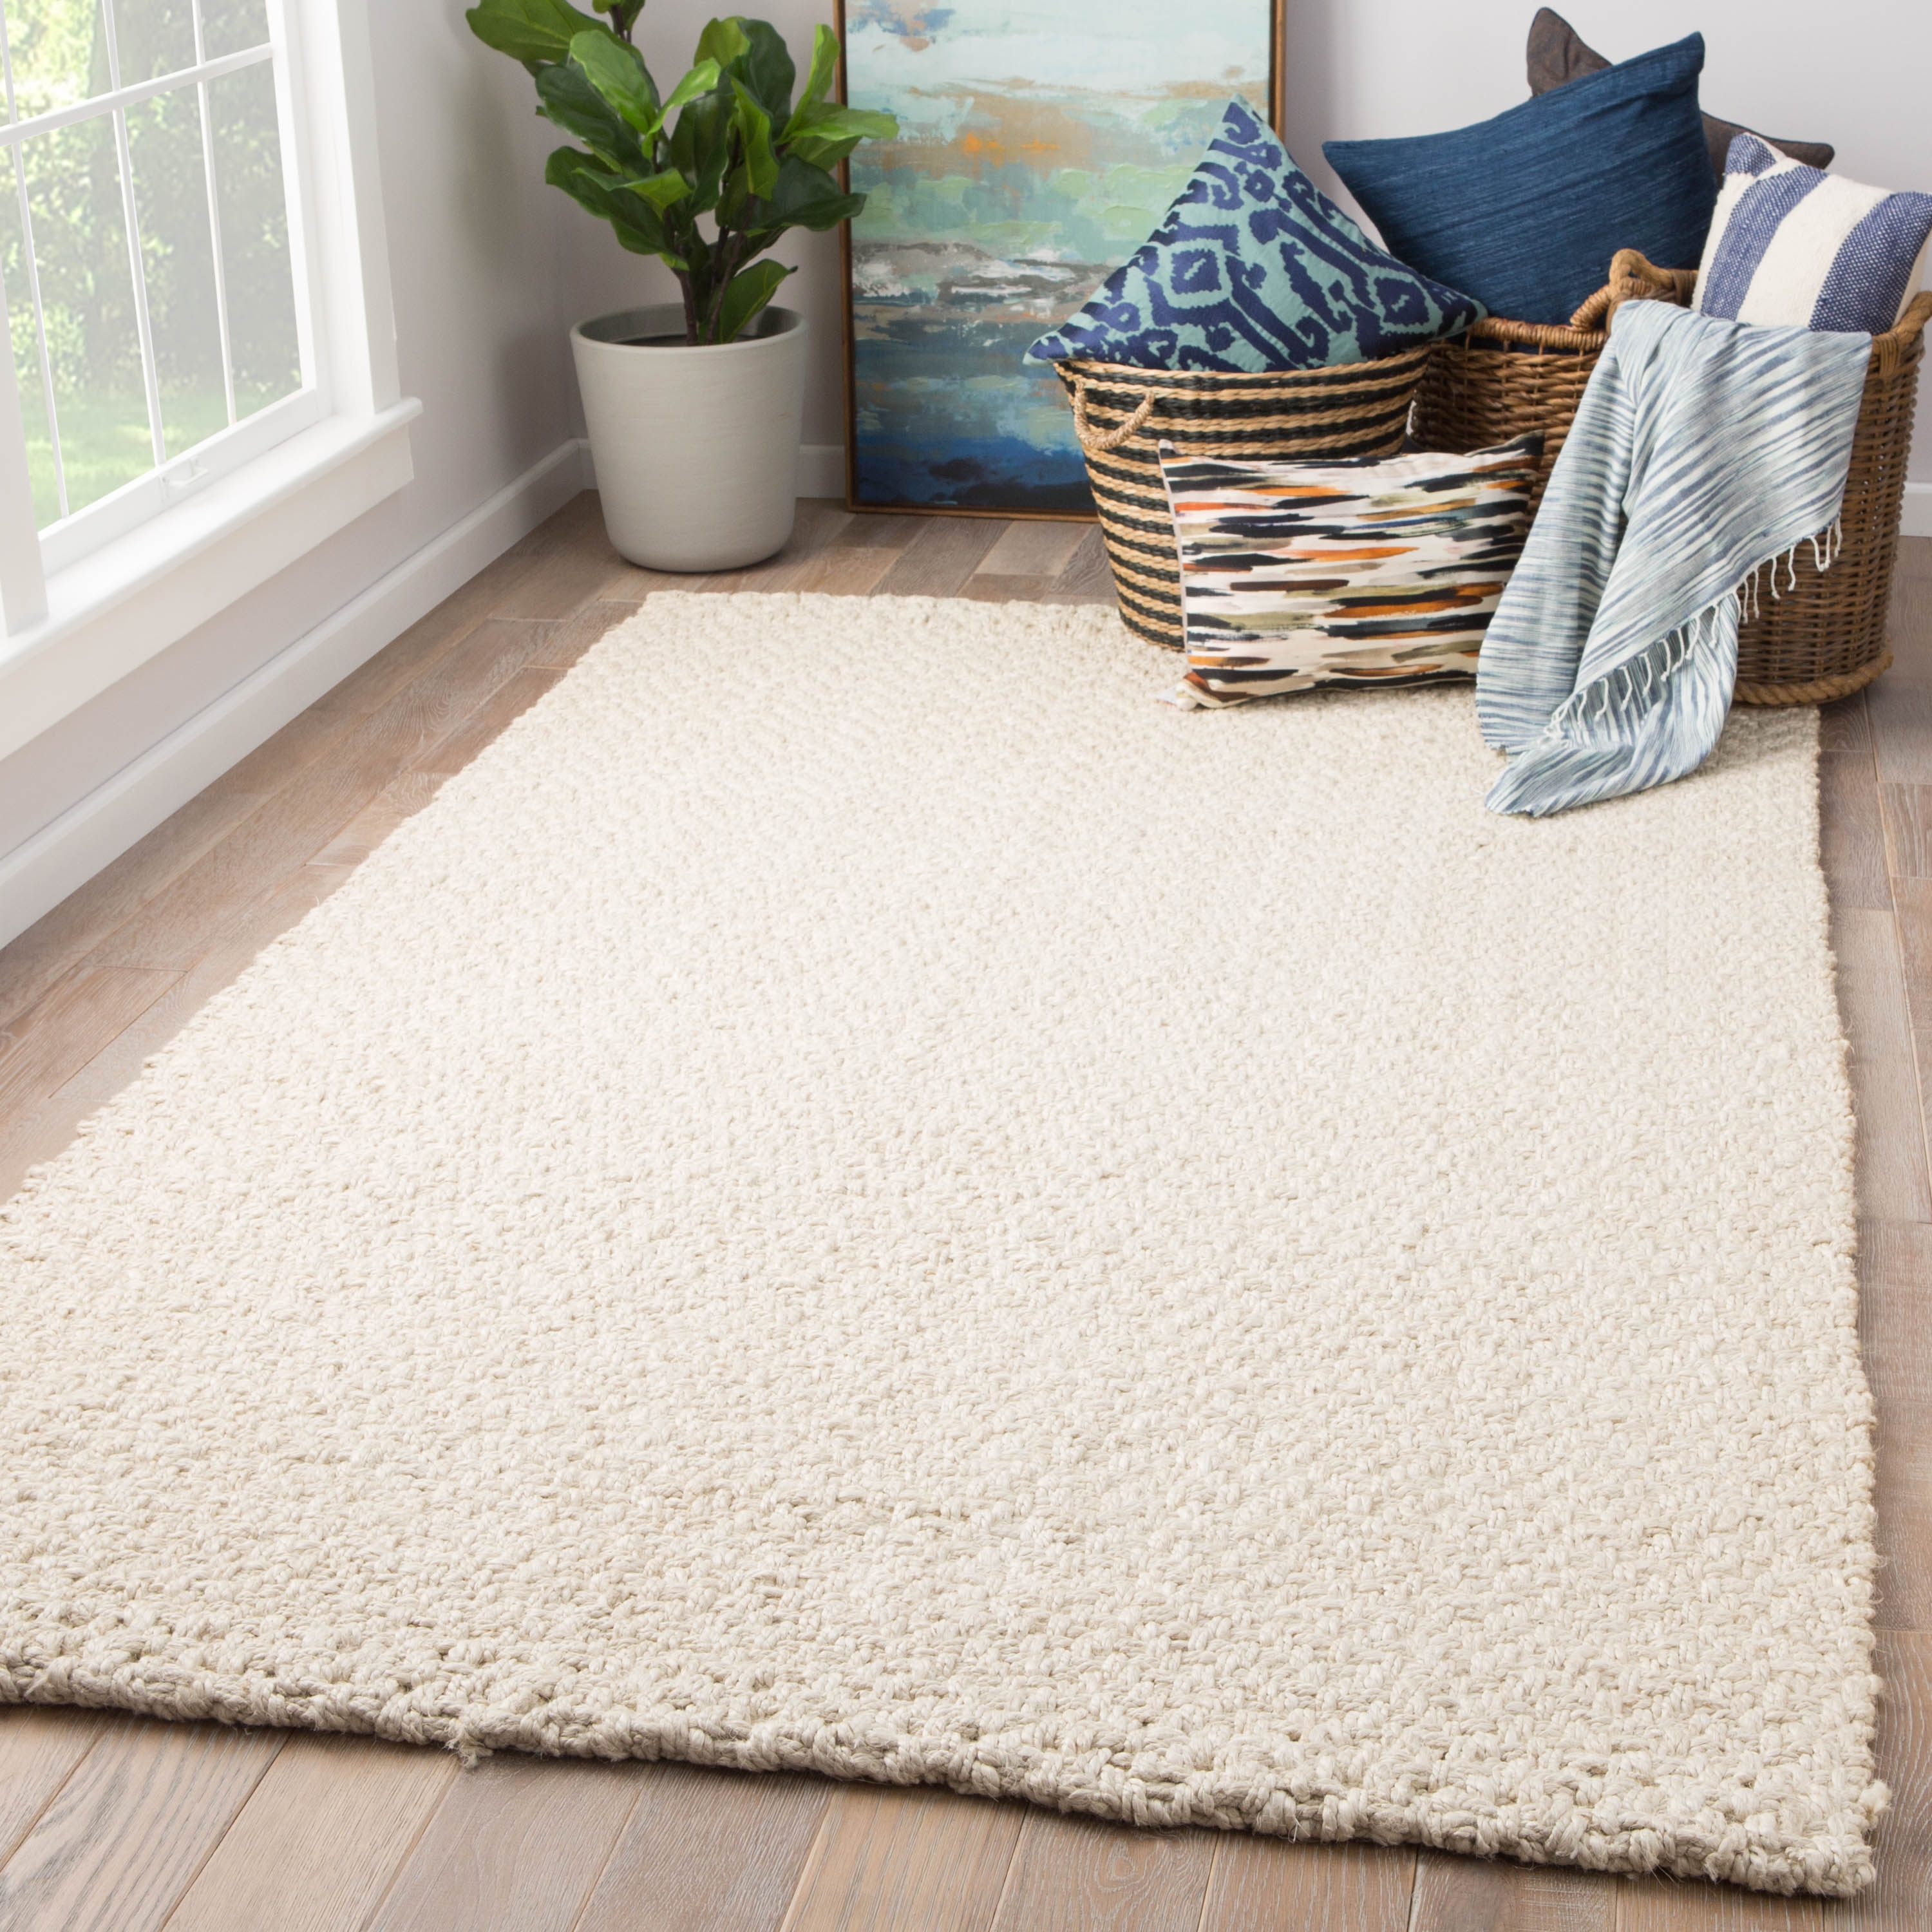 Tracie Natural Solid White Area Rug (6'X9') - Image 4